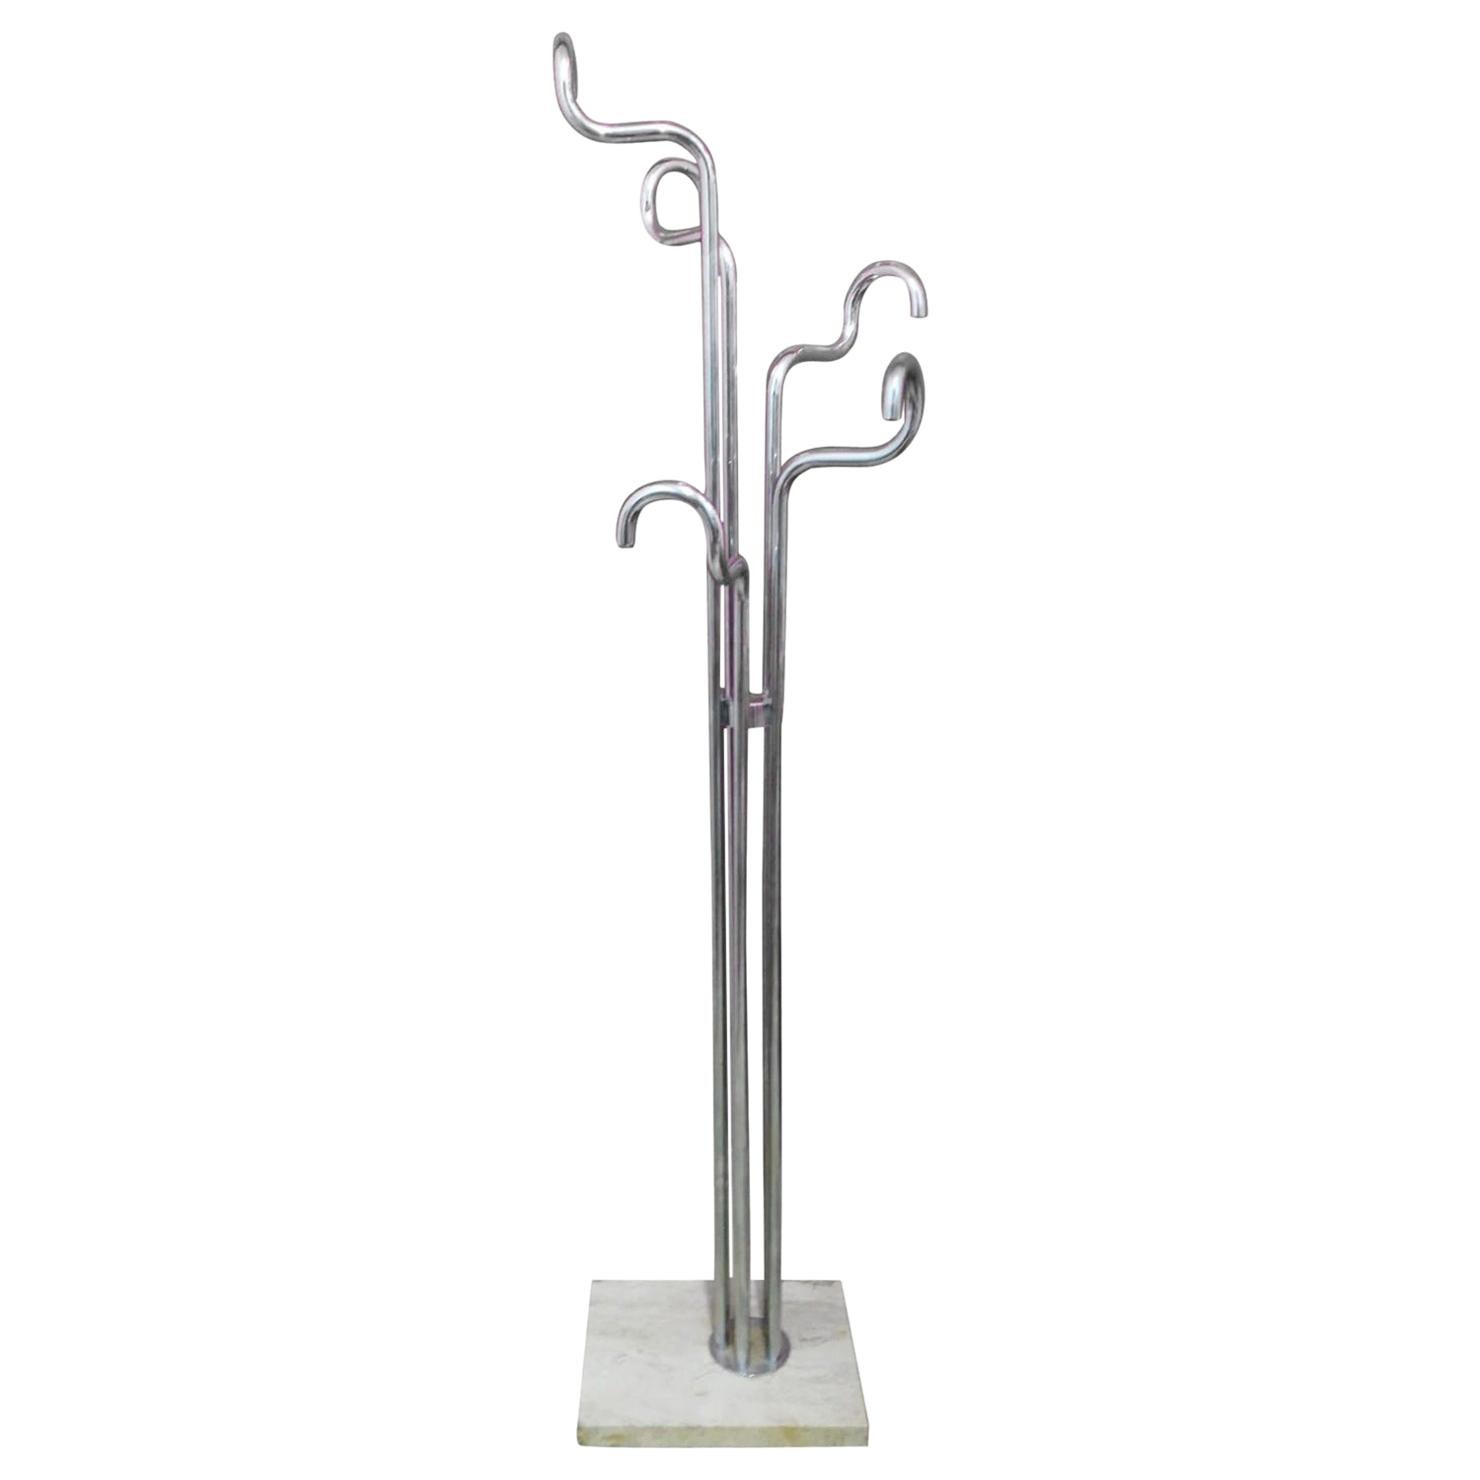 Coat Hanger Made of Steel and Marble Base, Italian Style, 1960s For Sale